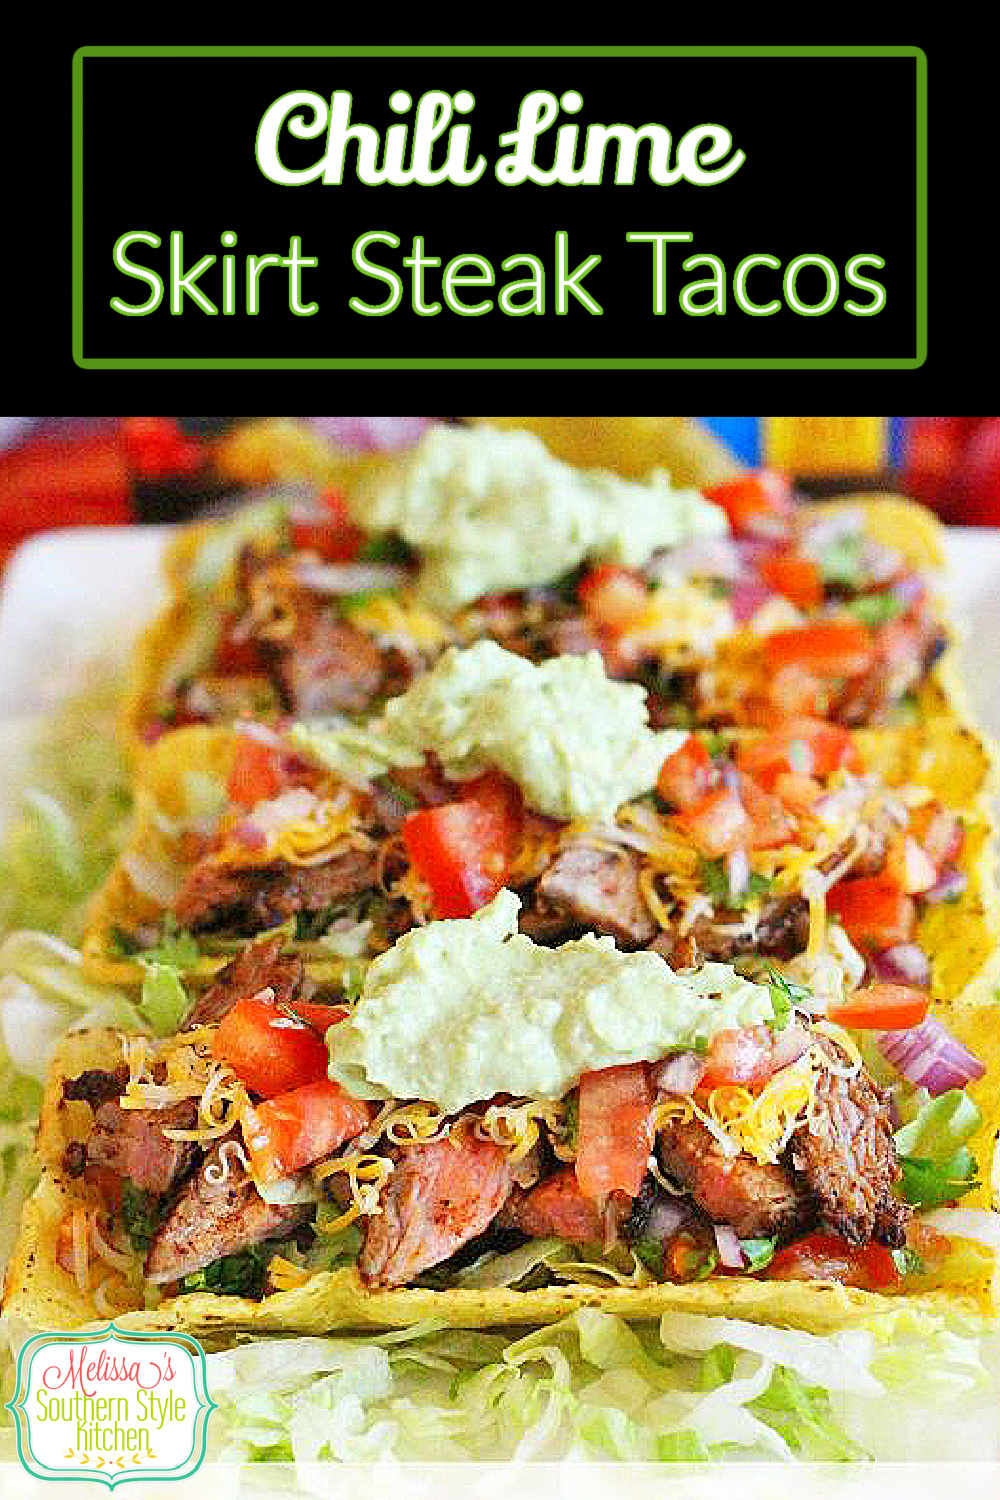 Enjoy these Chili Lime Skirt Steak Tacos with Avocado Cream for a low-stress weekday meal or a laid back weekend homestyle fiesta #skirtsteaktacos #steaktacos #tacorecipes #skirtsteak #steakrecipes #tacotuesday